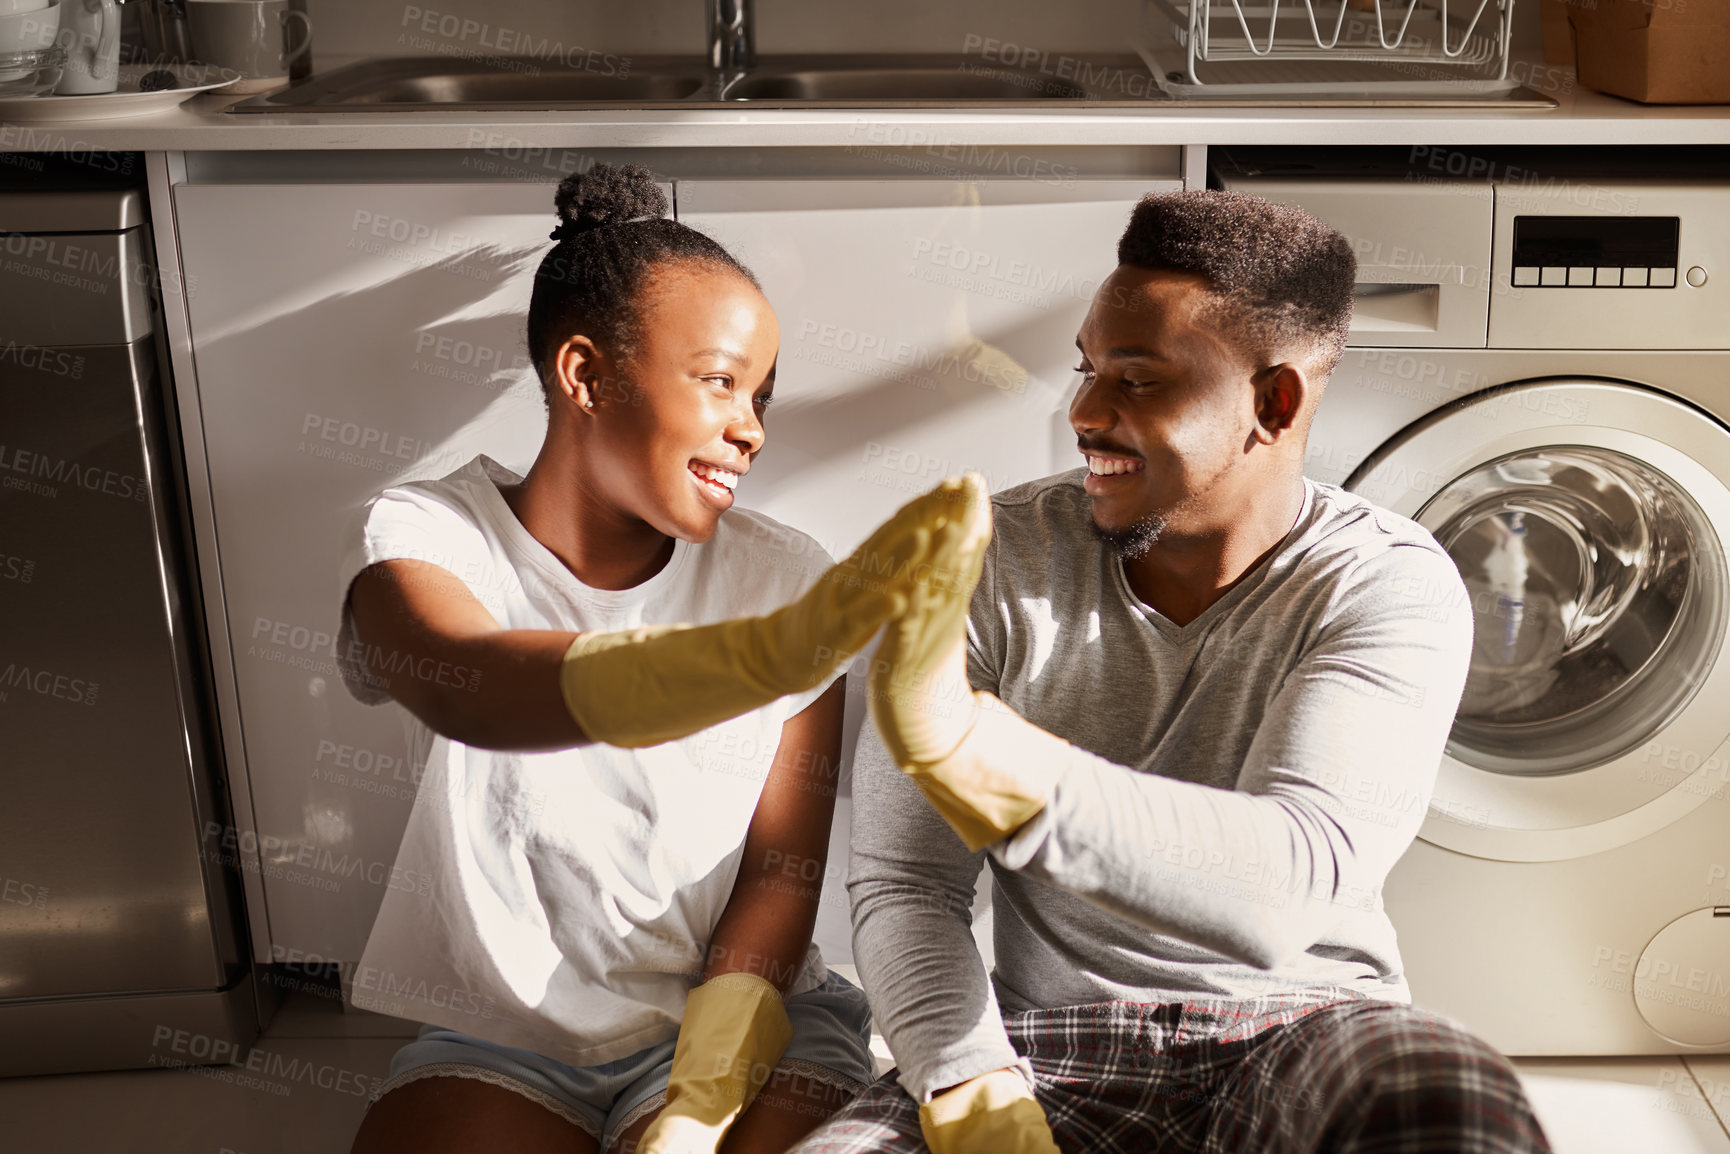 Buy stock photo Shot of a young couple giving each other a high five after doing chores together at home